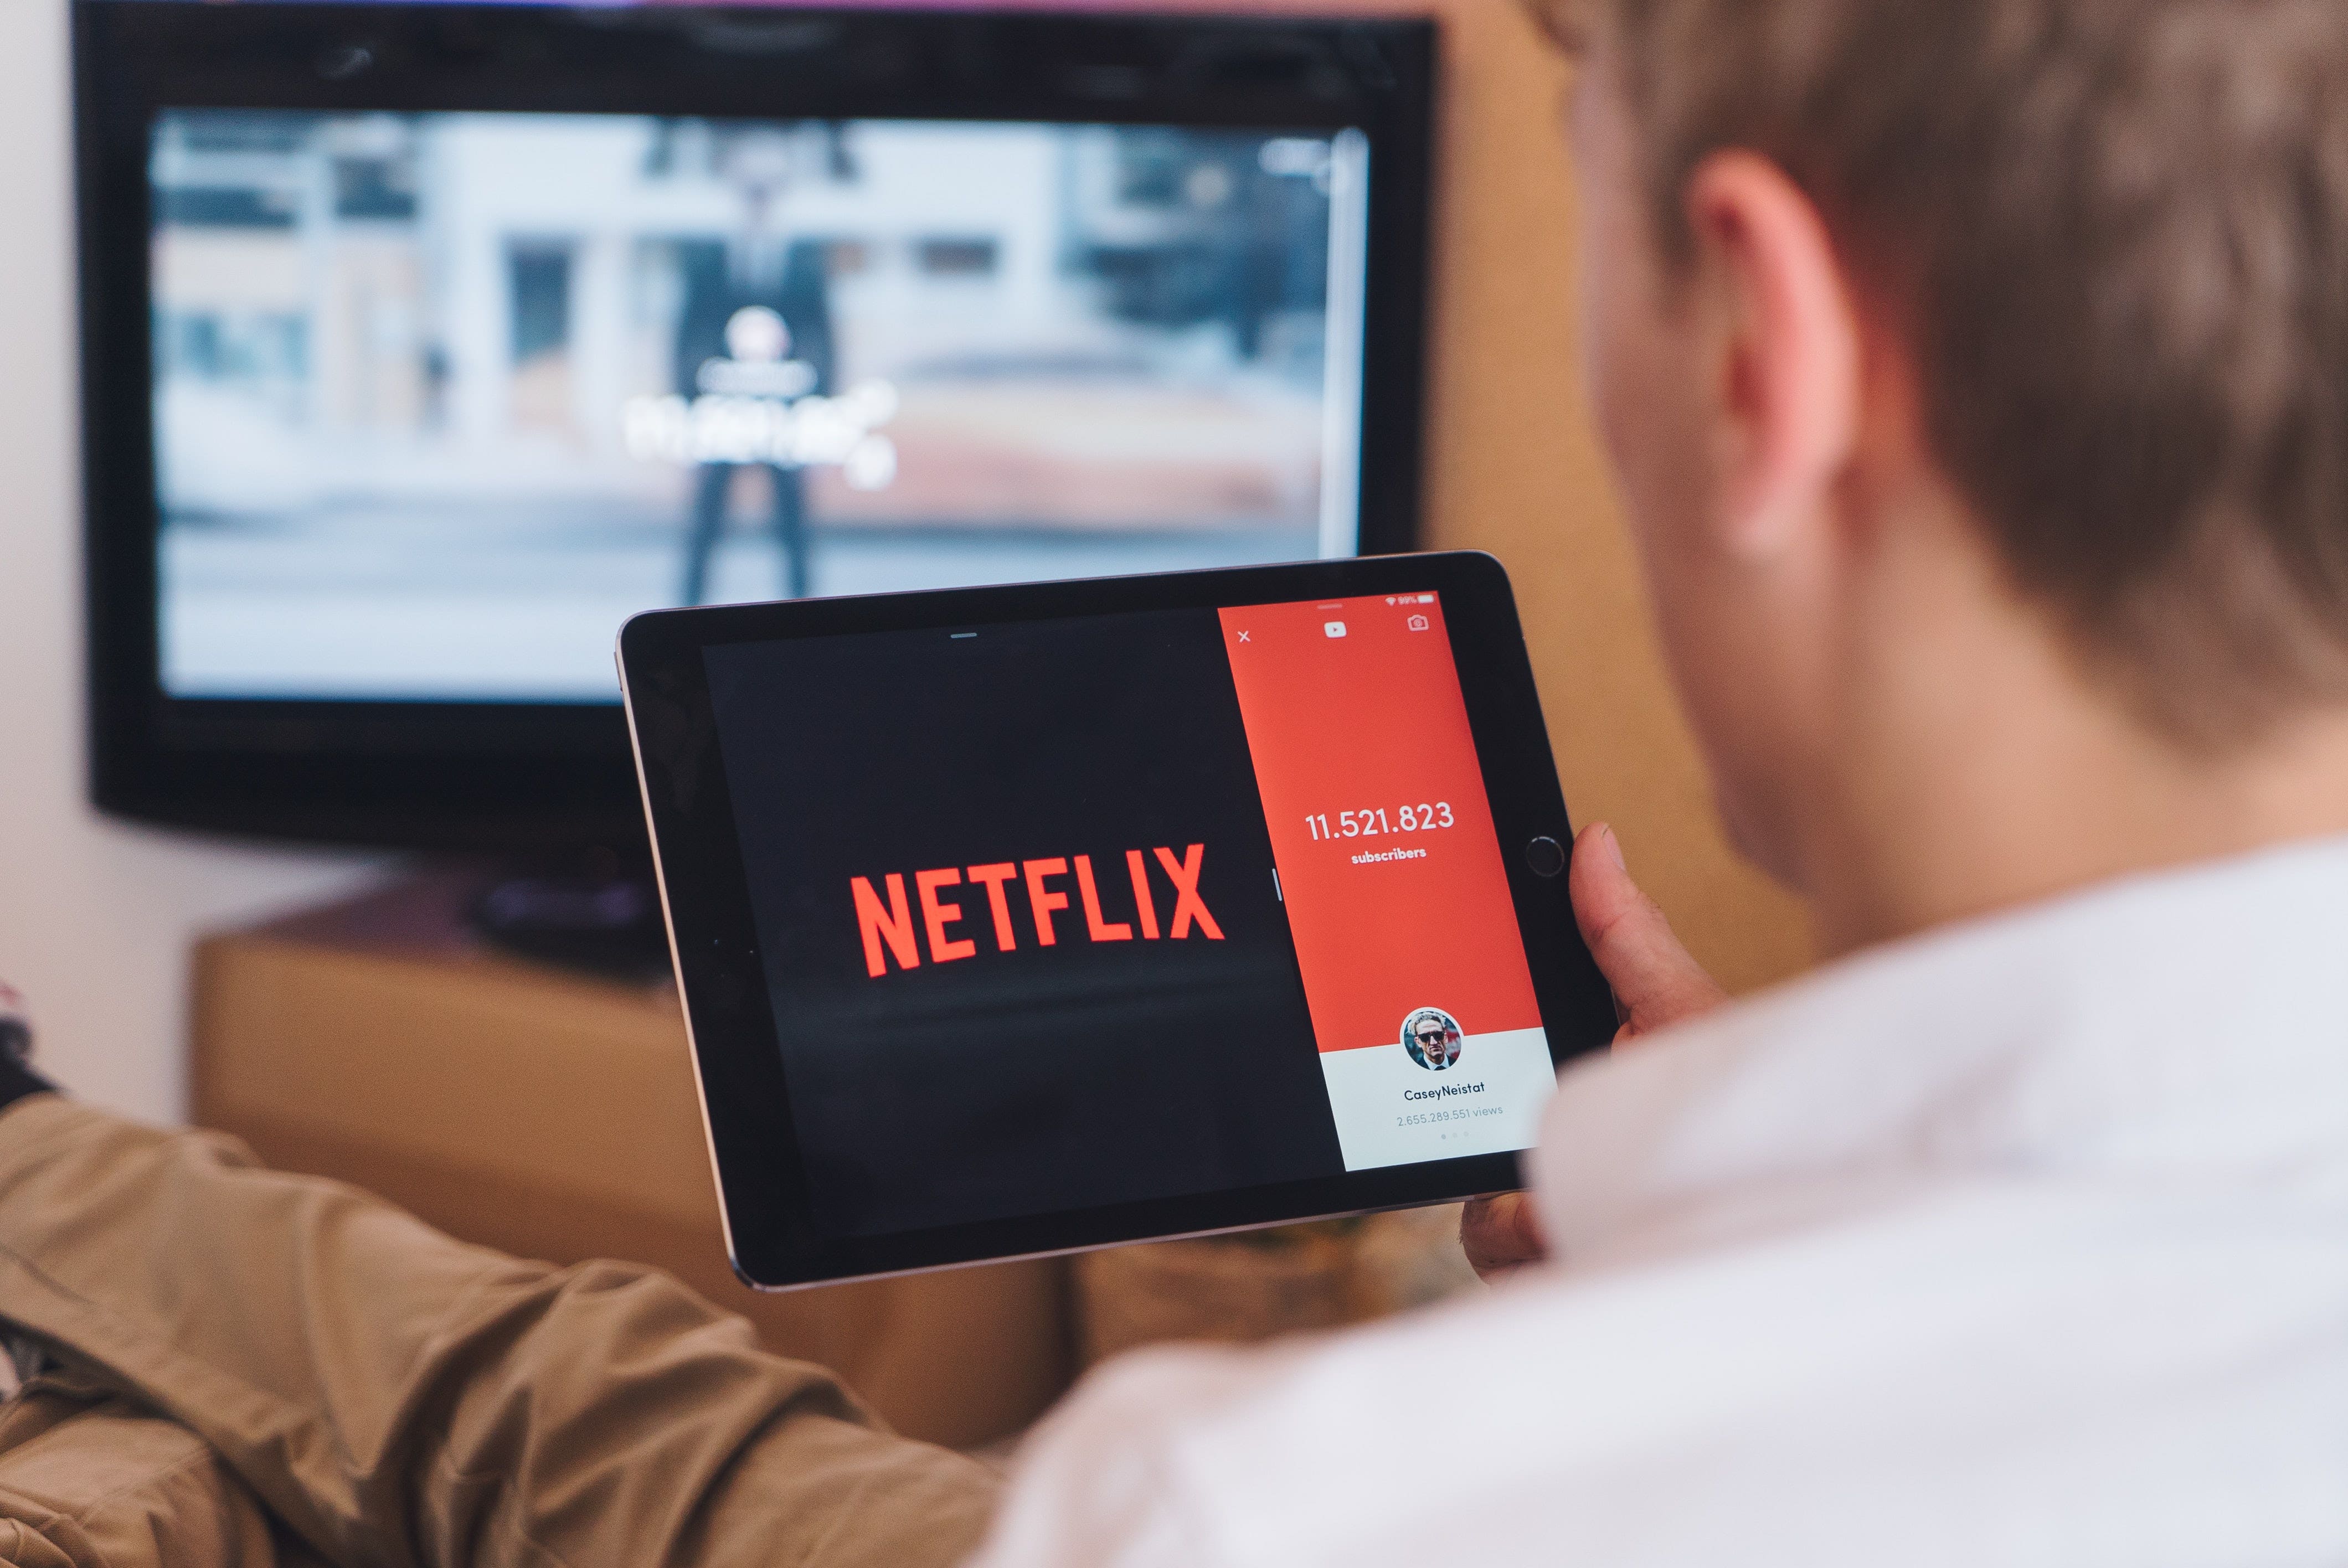 Apple, Netflix Haven't Paid A Dime In Taxes Despite Drawing $43M Streaming Revenue, Vietnam Says